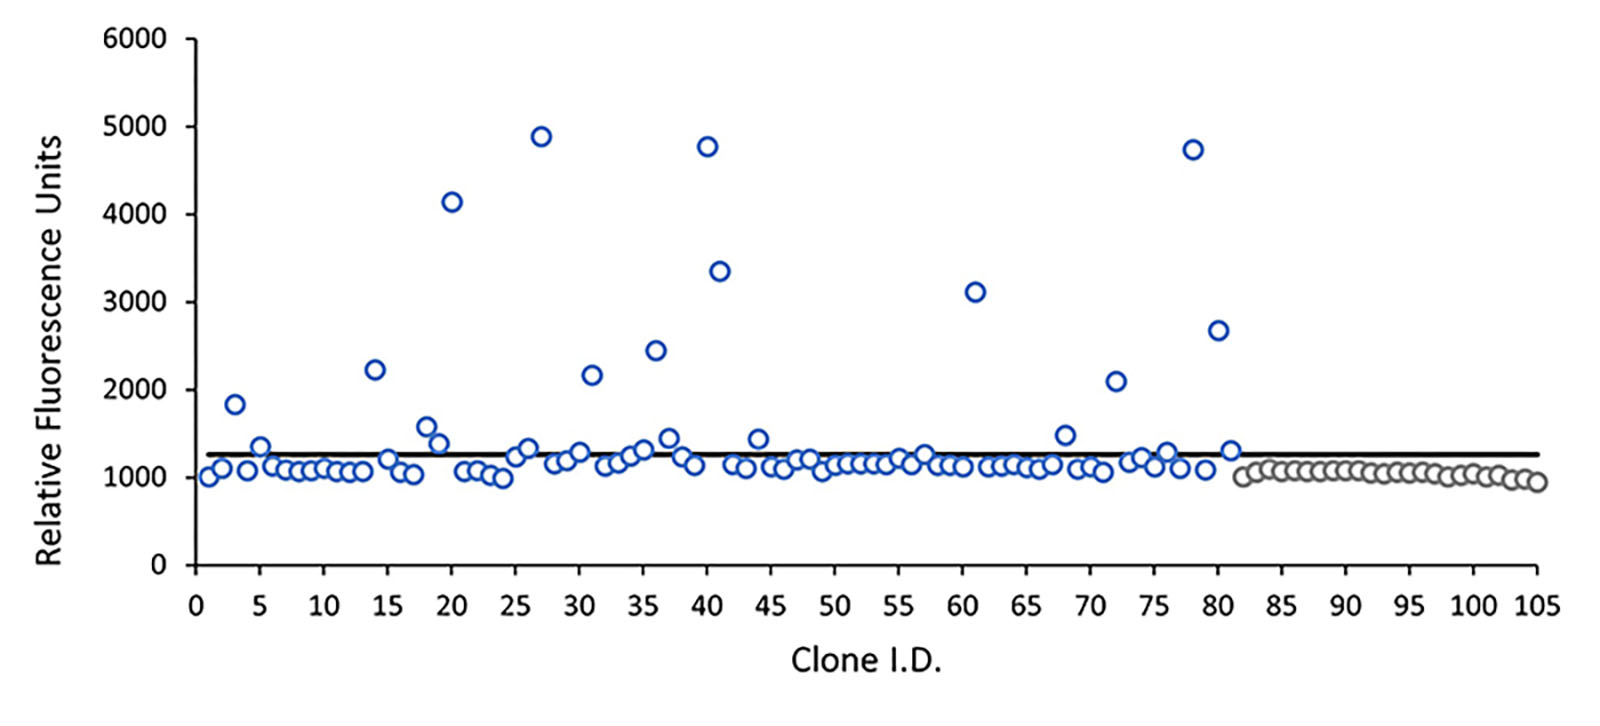 Scatter plot of relative fluorescence units (RFUs) for different clones.